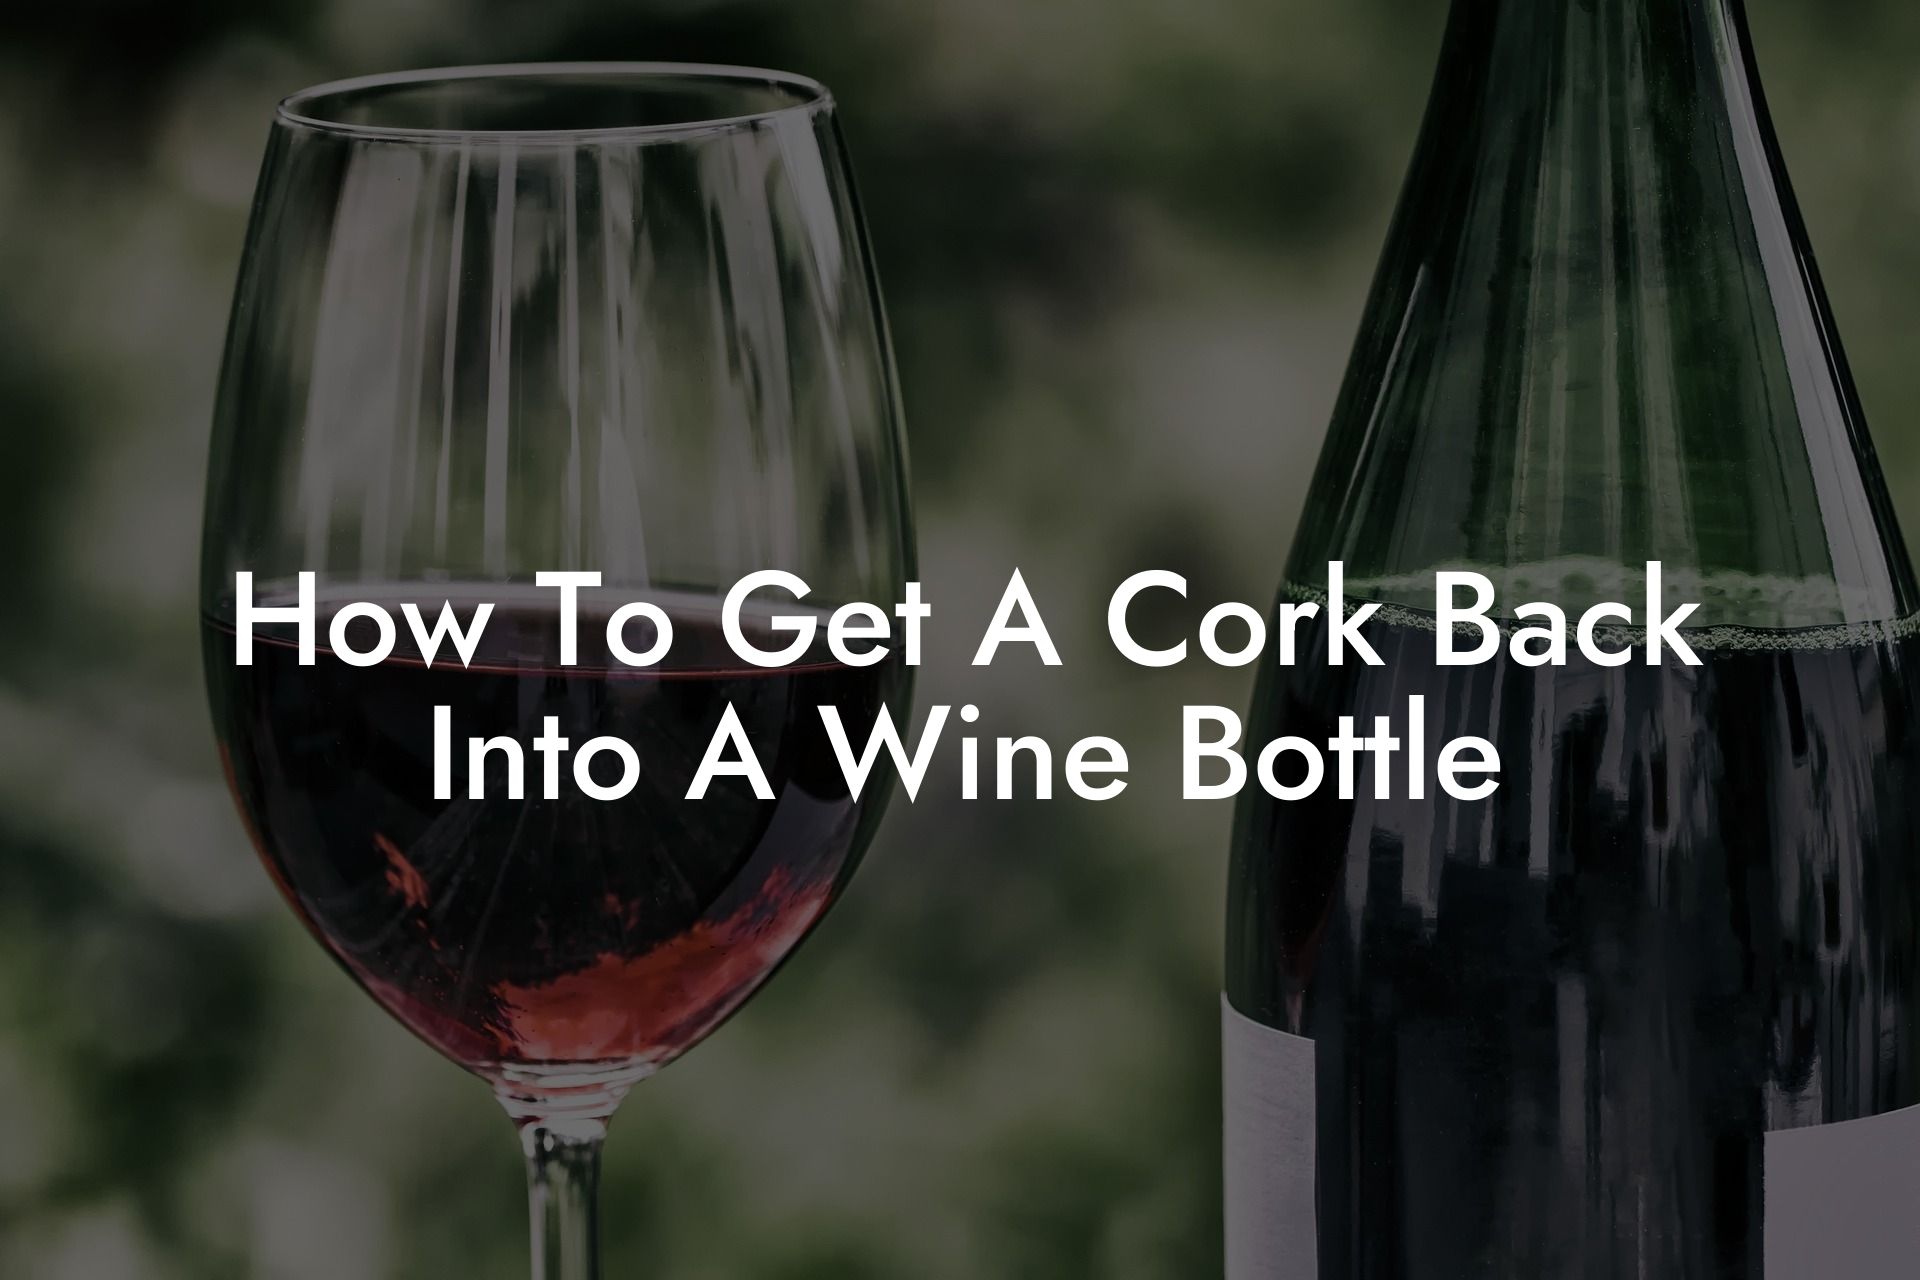 How To Get A Cork Back Into A Wine Bottle